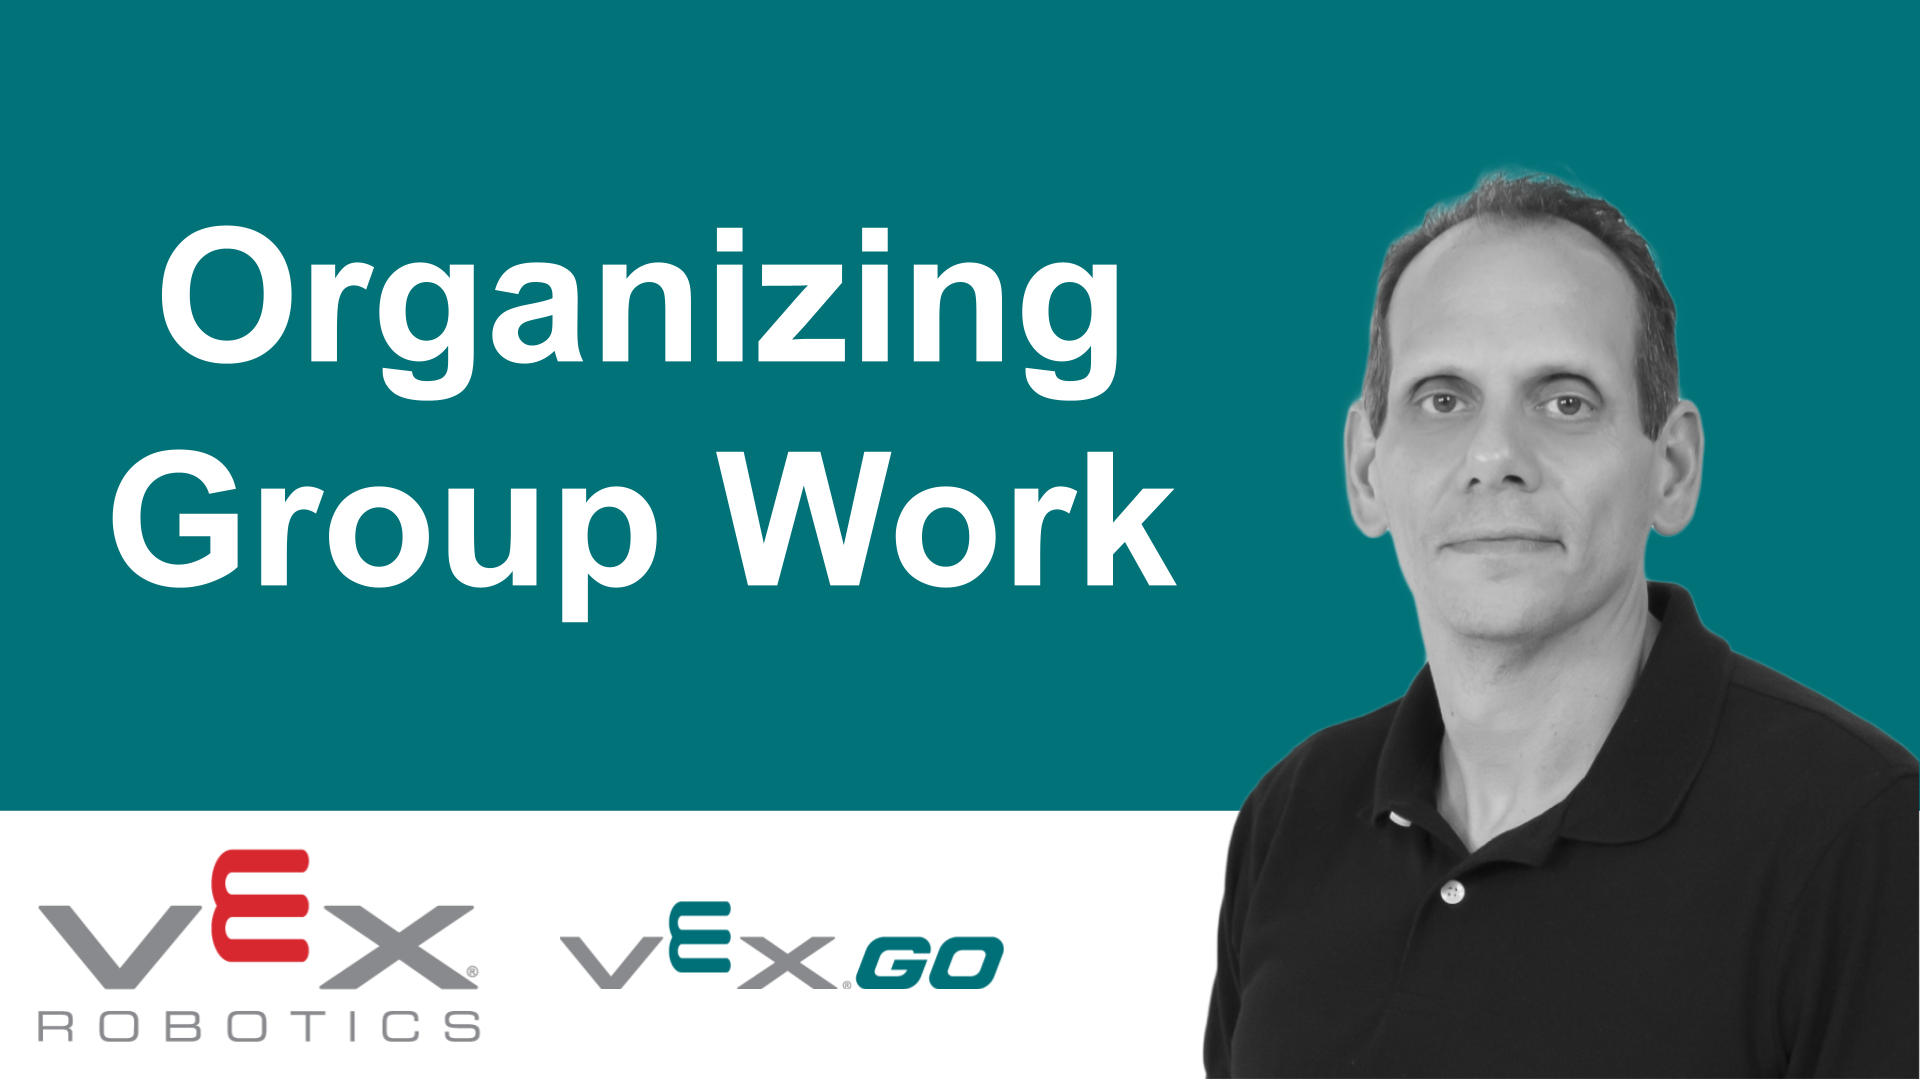 Organizing Group Work with VEX GO